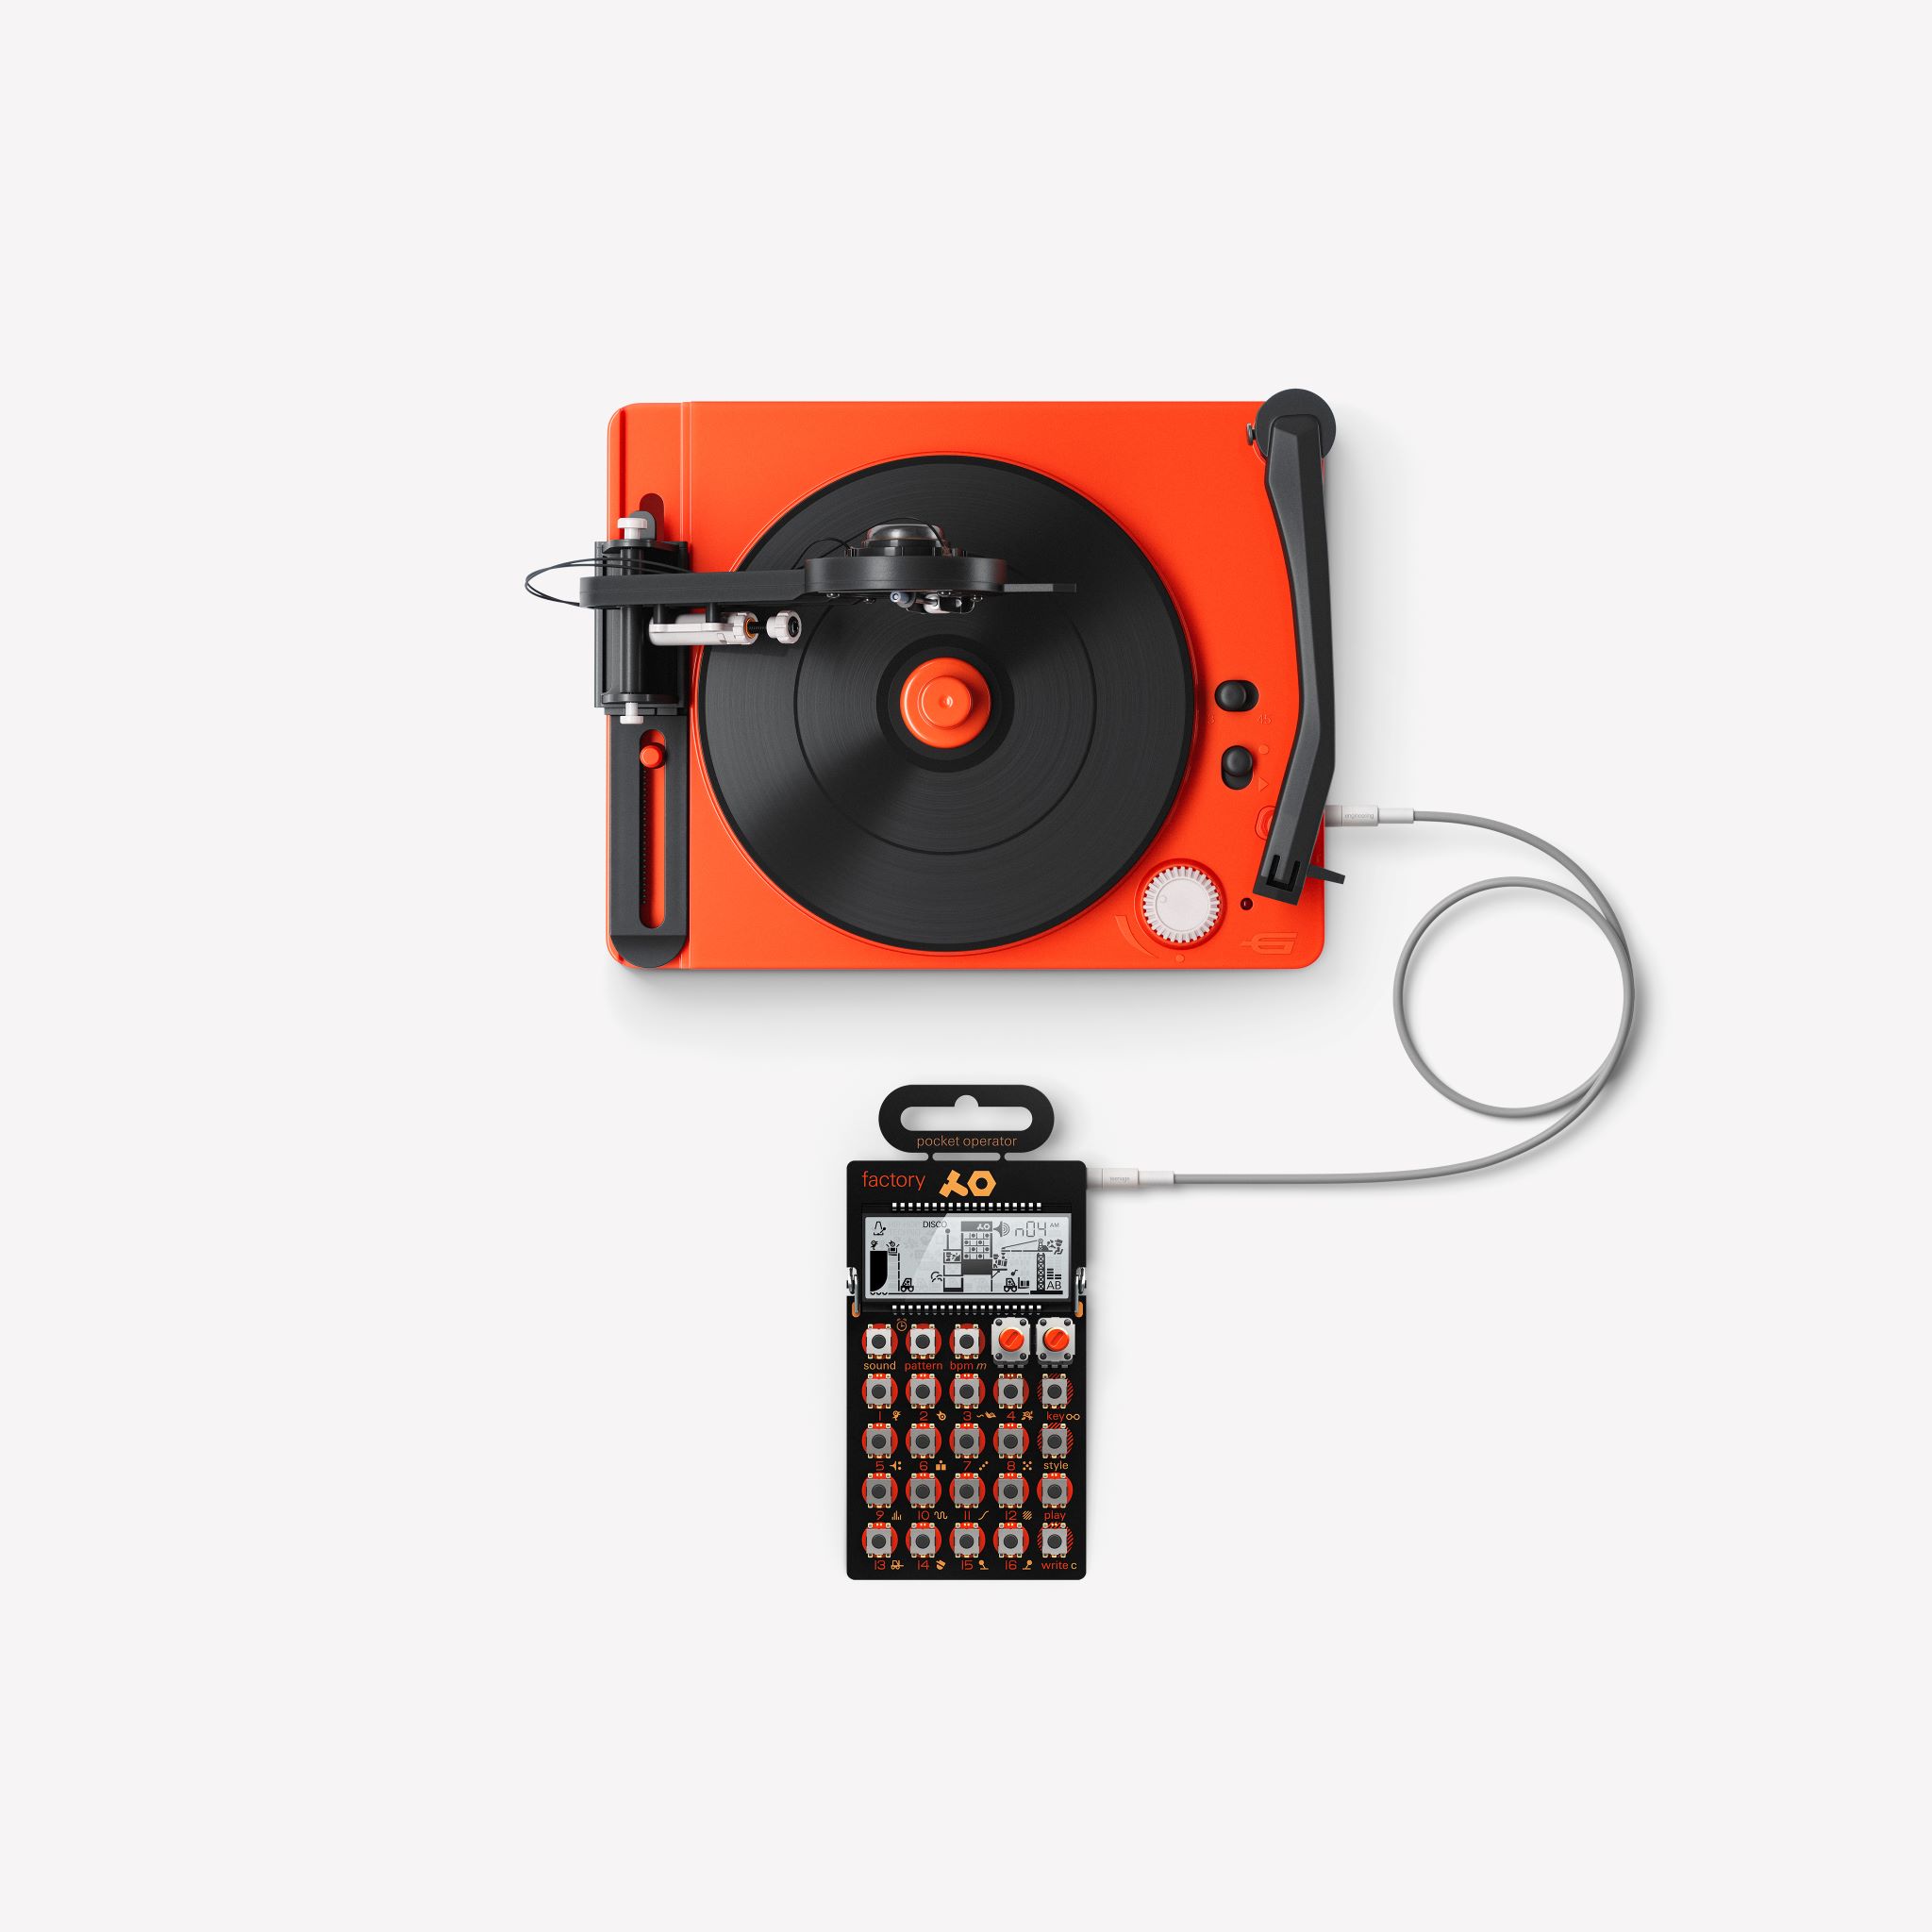 Make your own vinyl with Record Factory PO-80 with pocket operator.